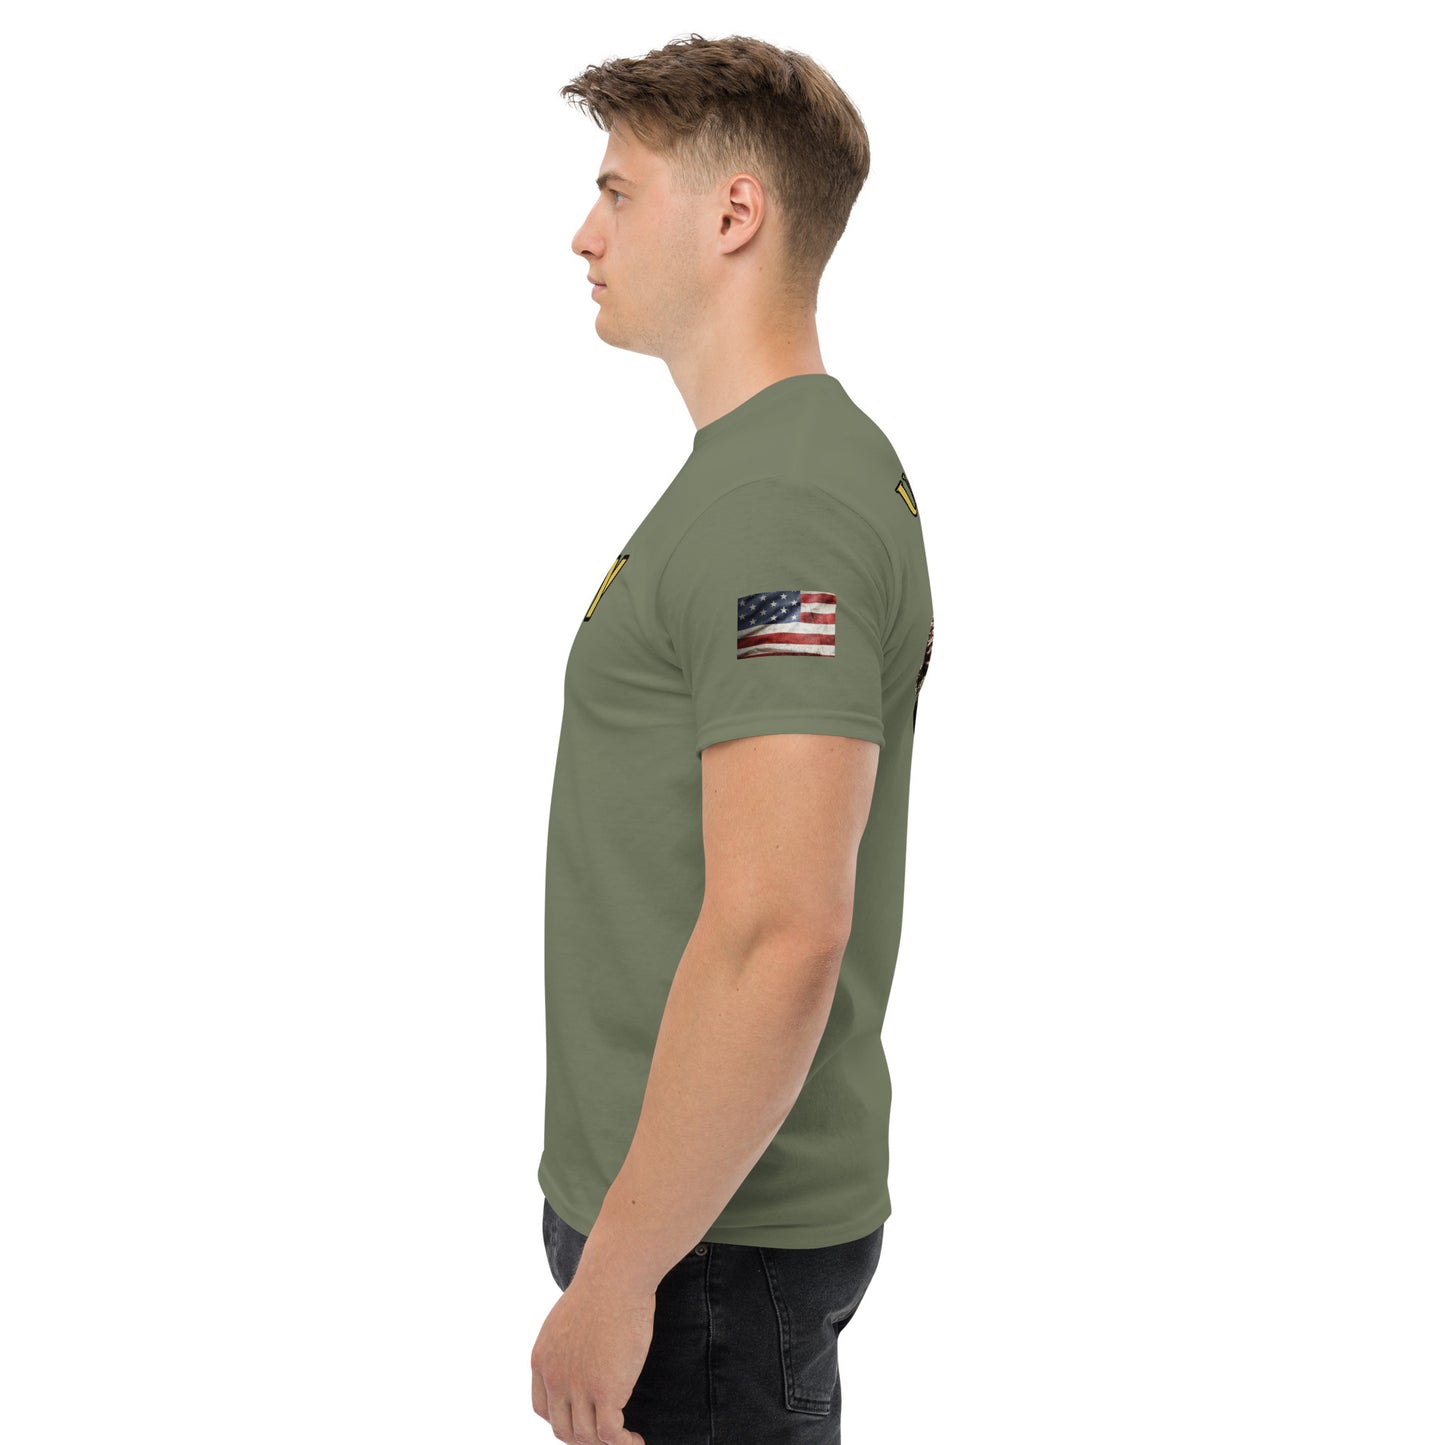 Army Soldier Alpha 954 Signature Men's classic tee